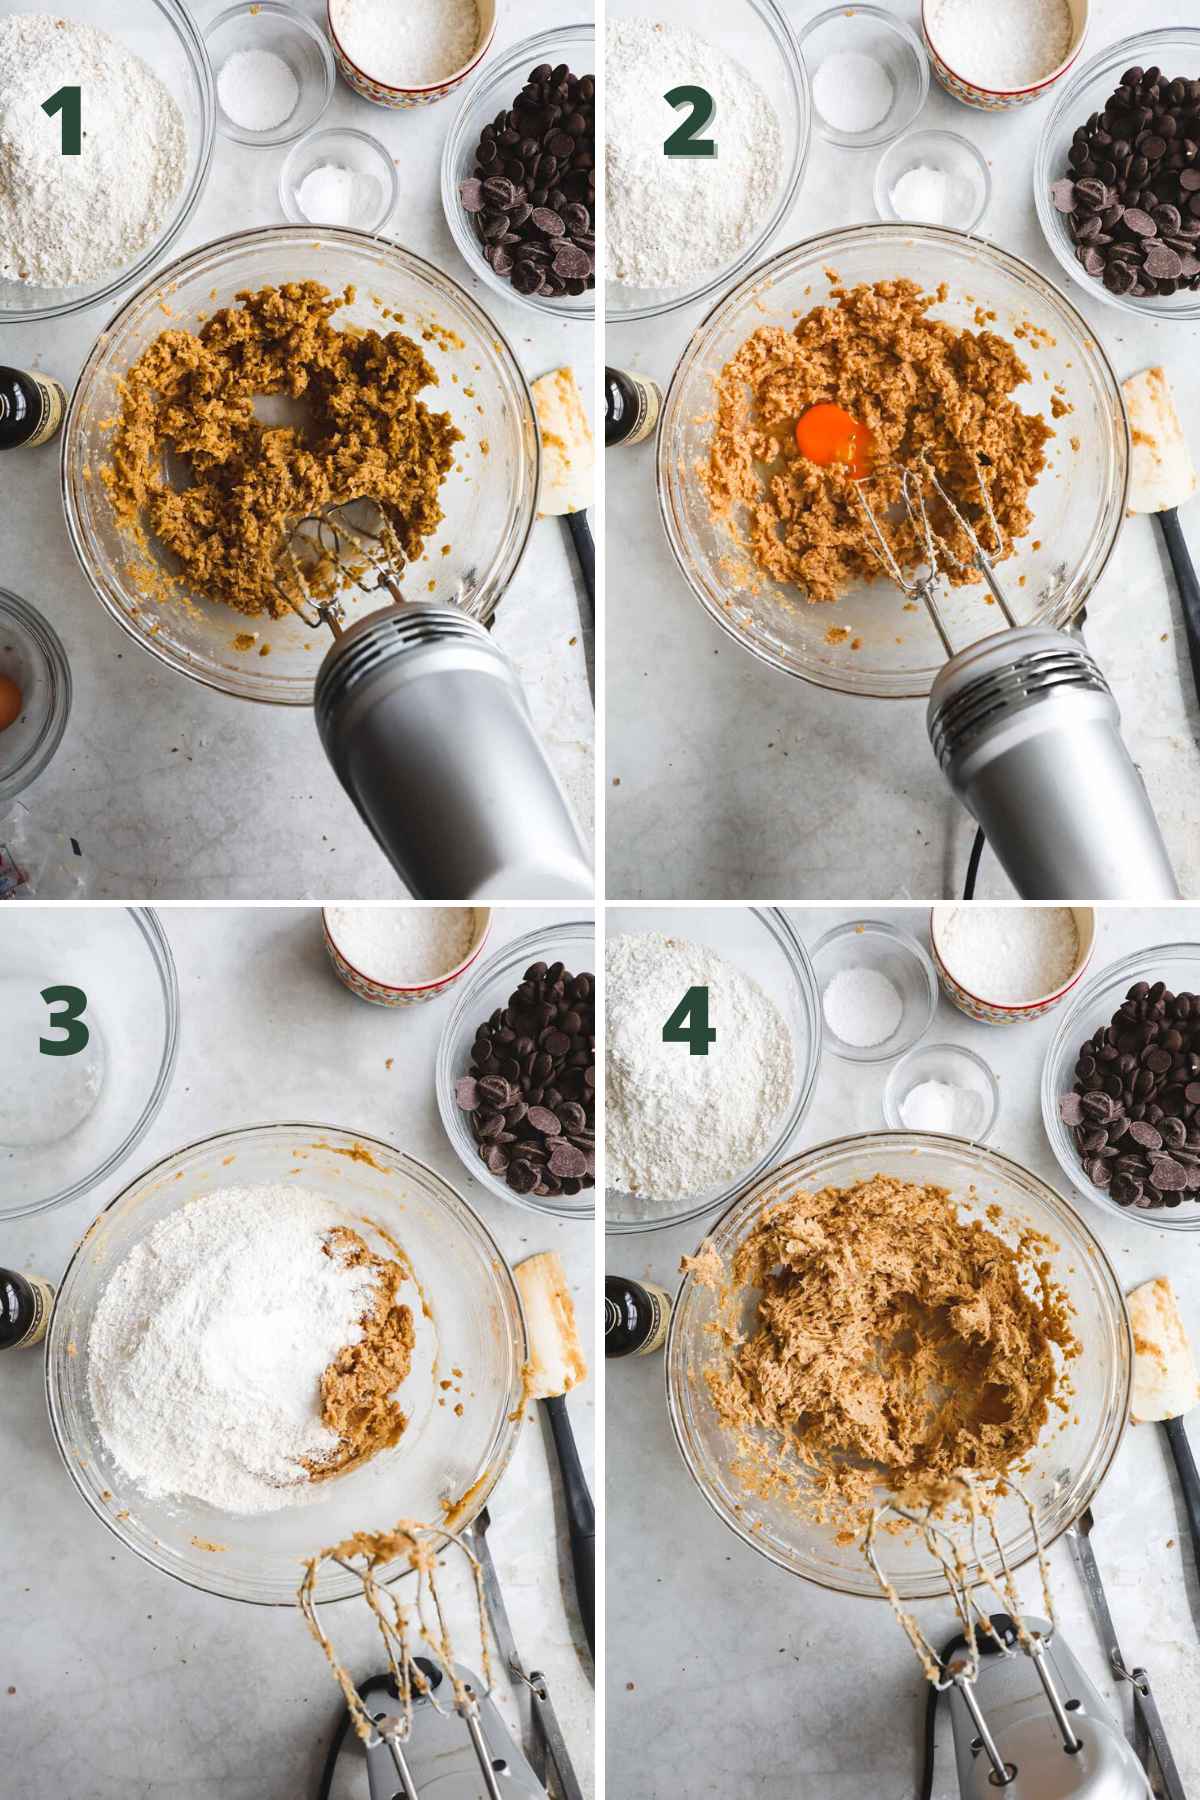 Steps to make small batch chocolate chip cookies, including creaming the butter and sugar, then mixing the egg yolk and flour.